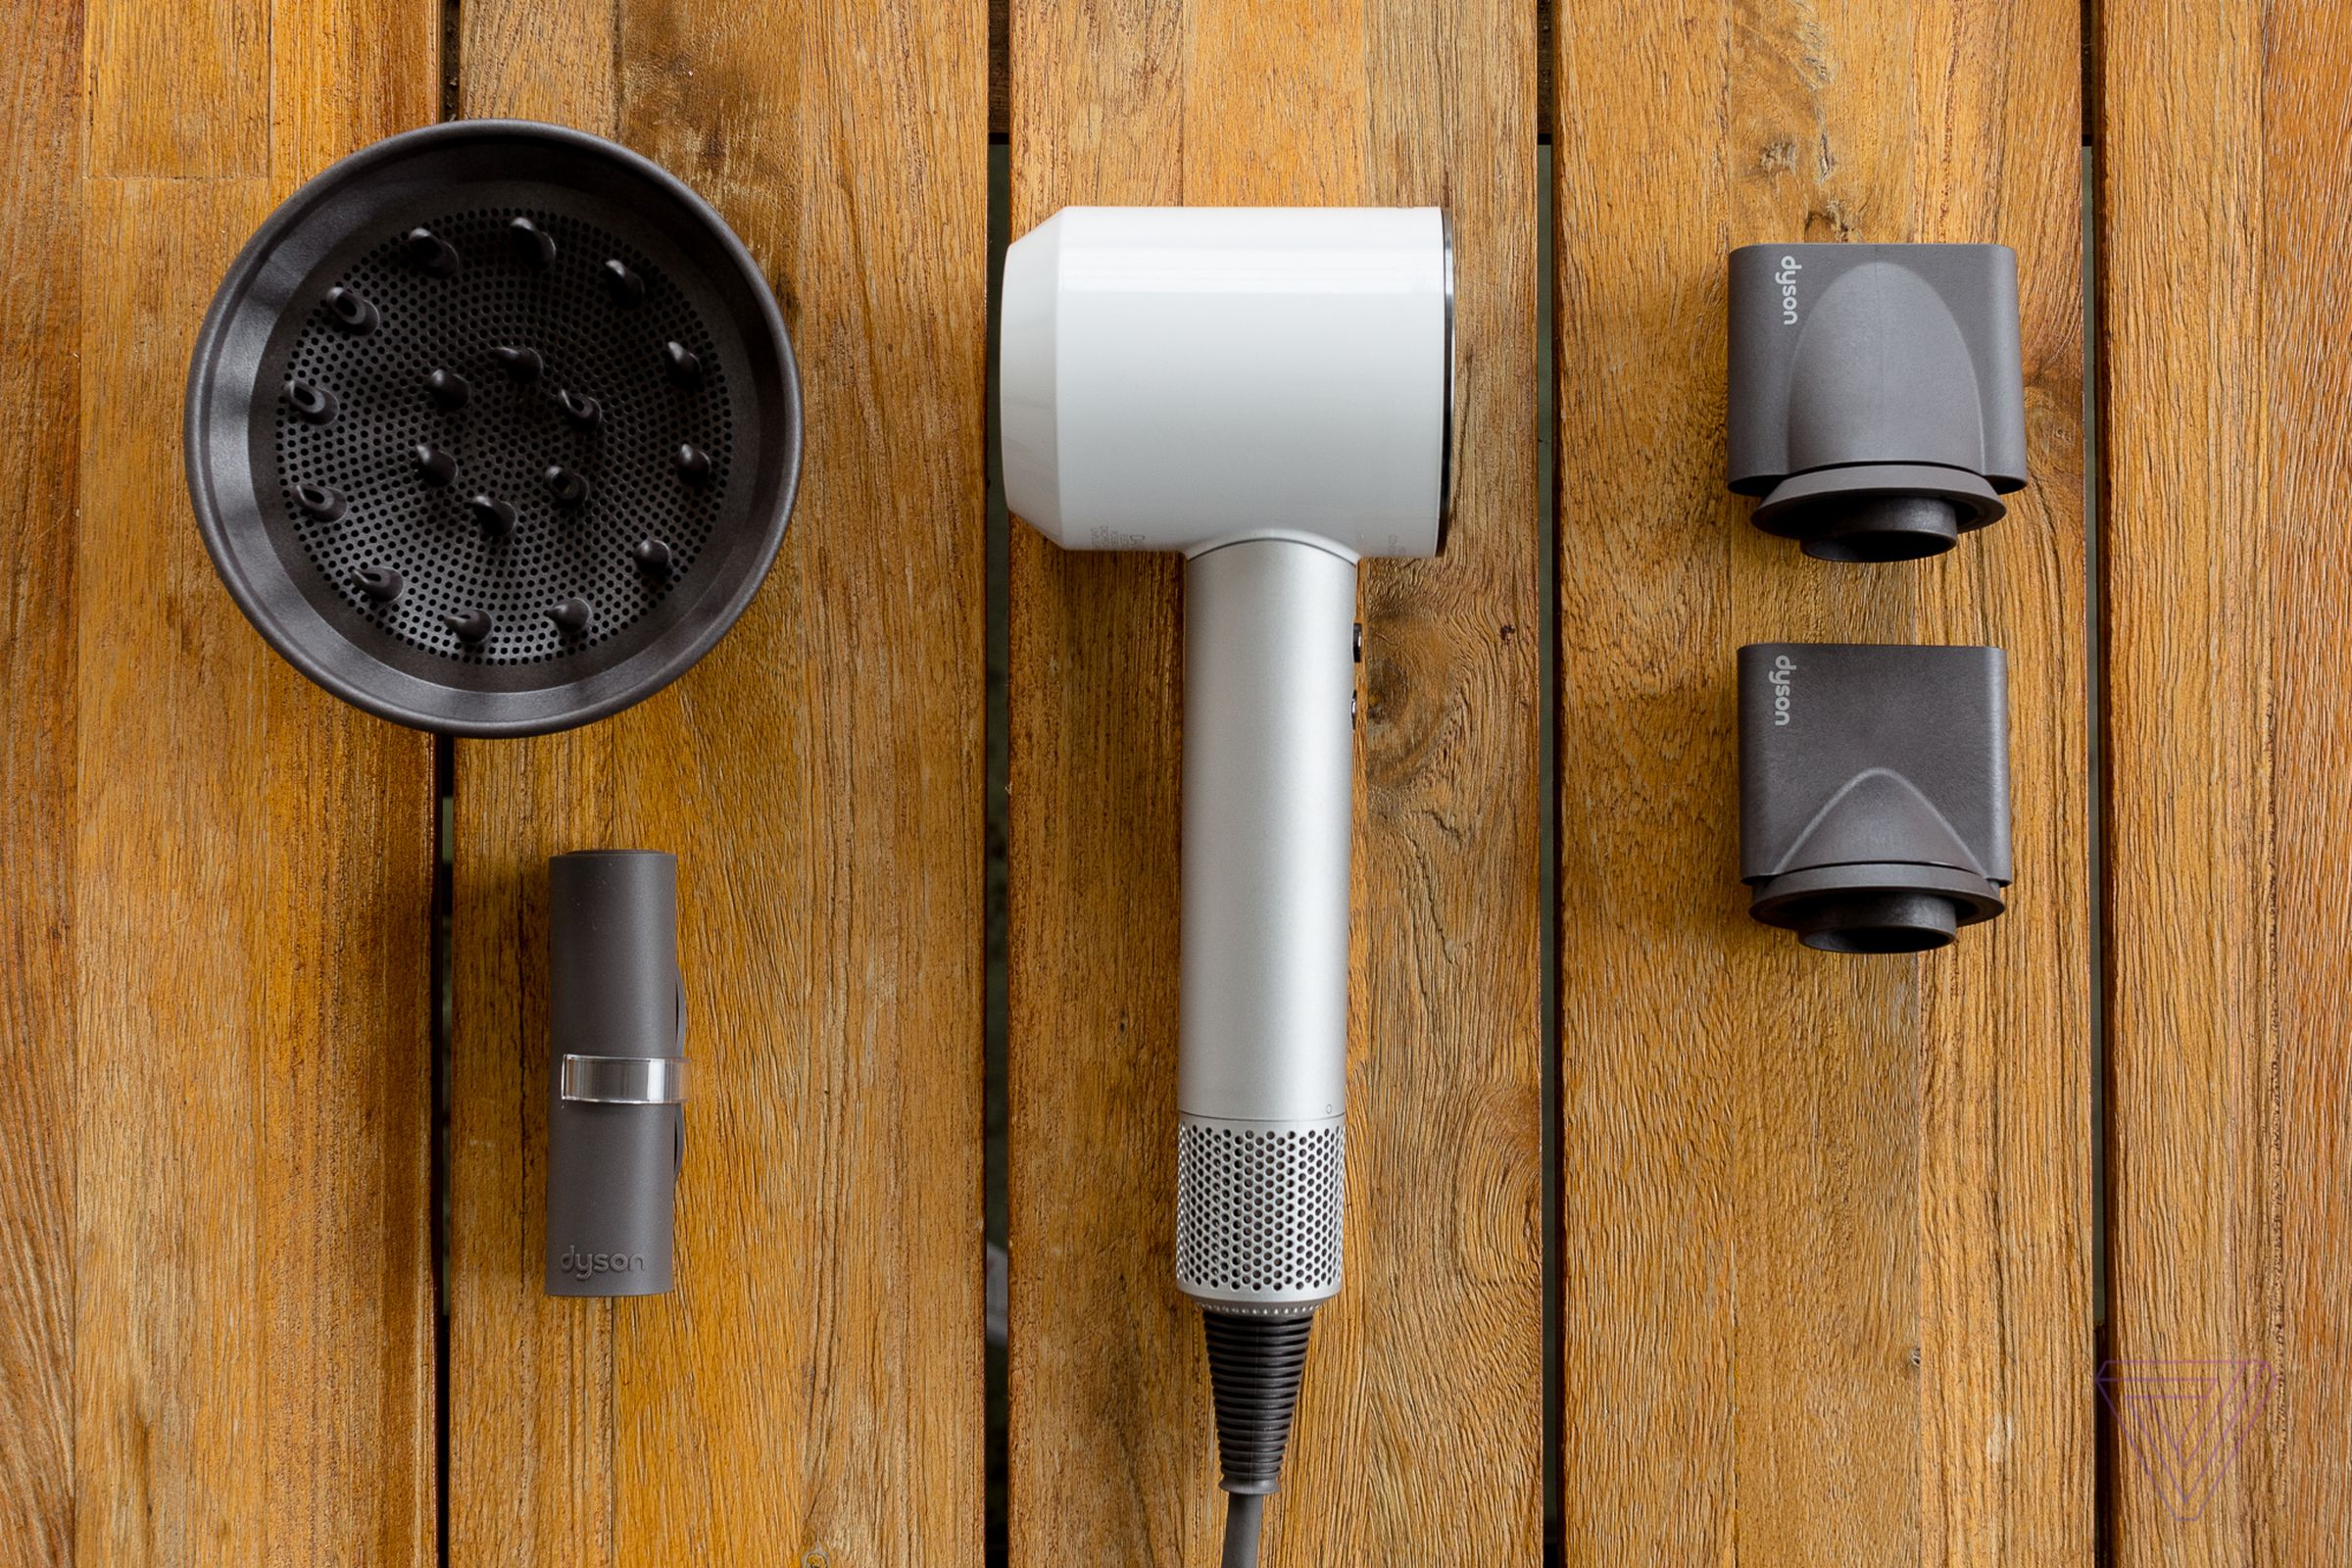 Dyson’s Supersonic hairdryer